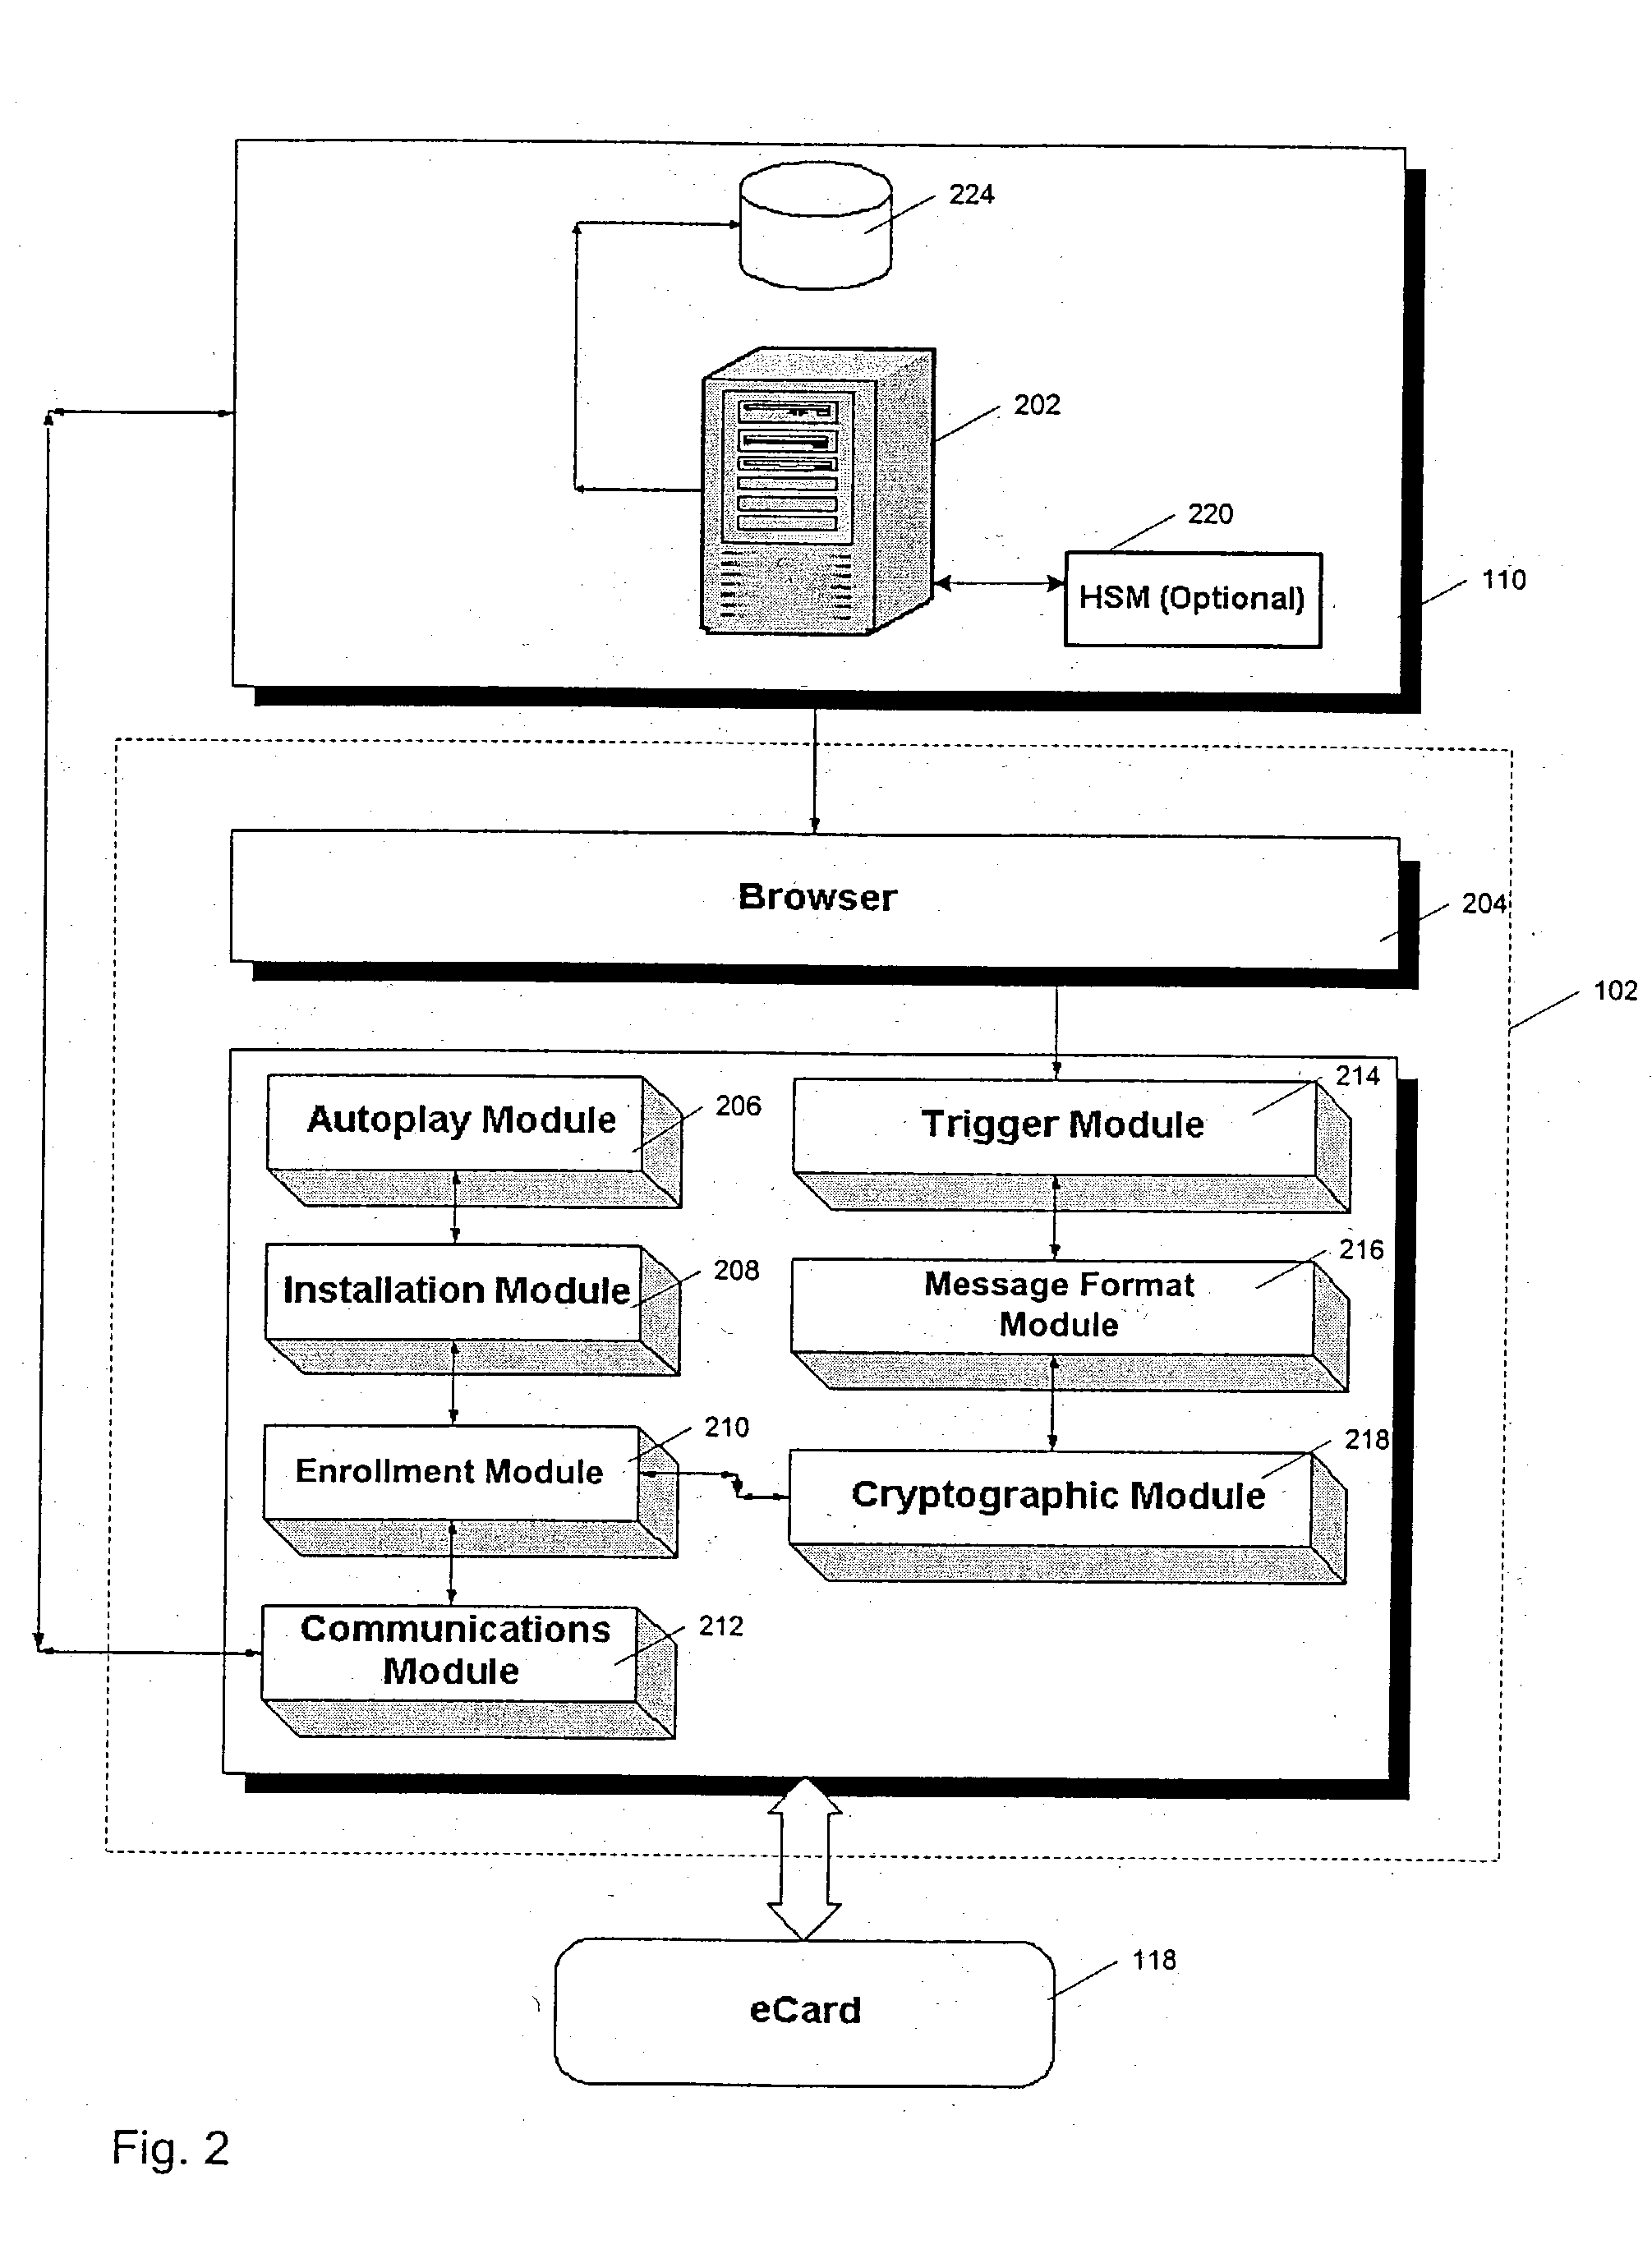 Systems and methods for authentication of electronic transactions